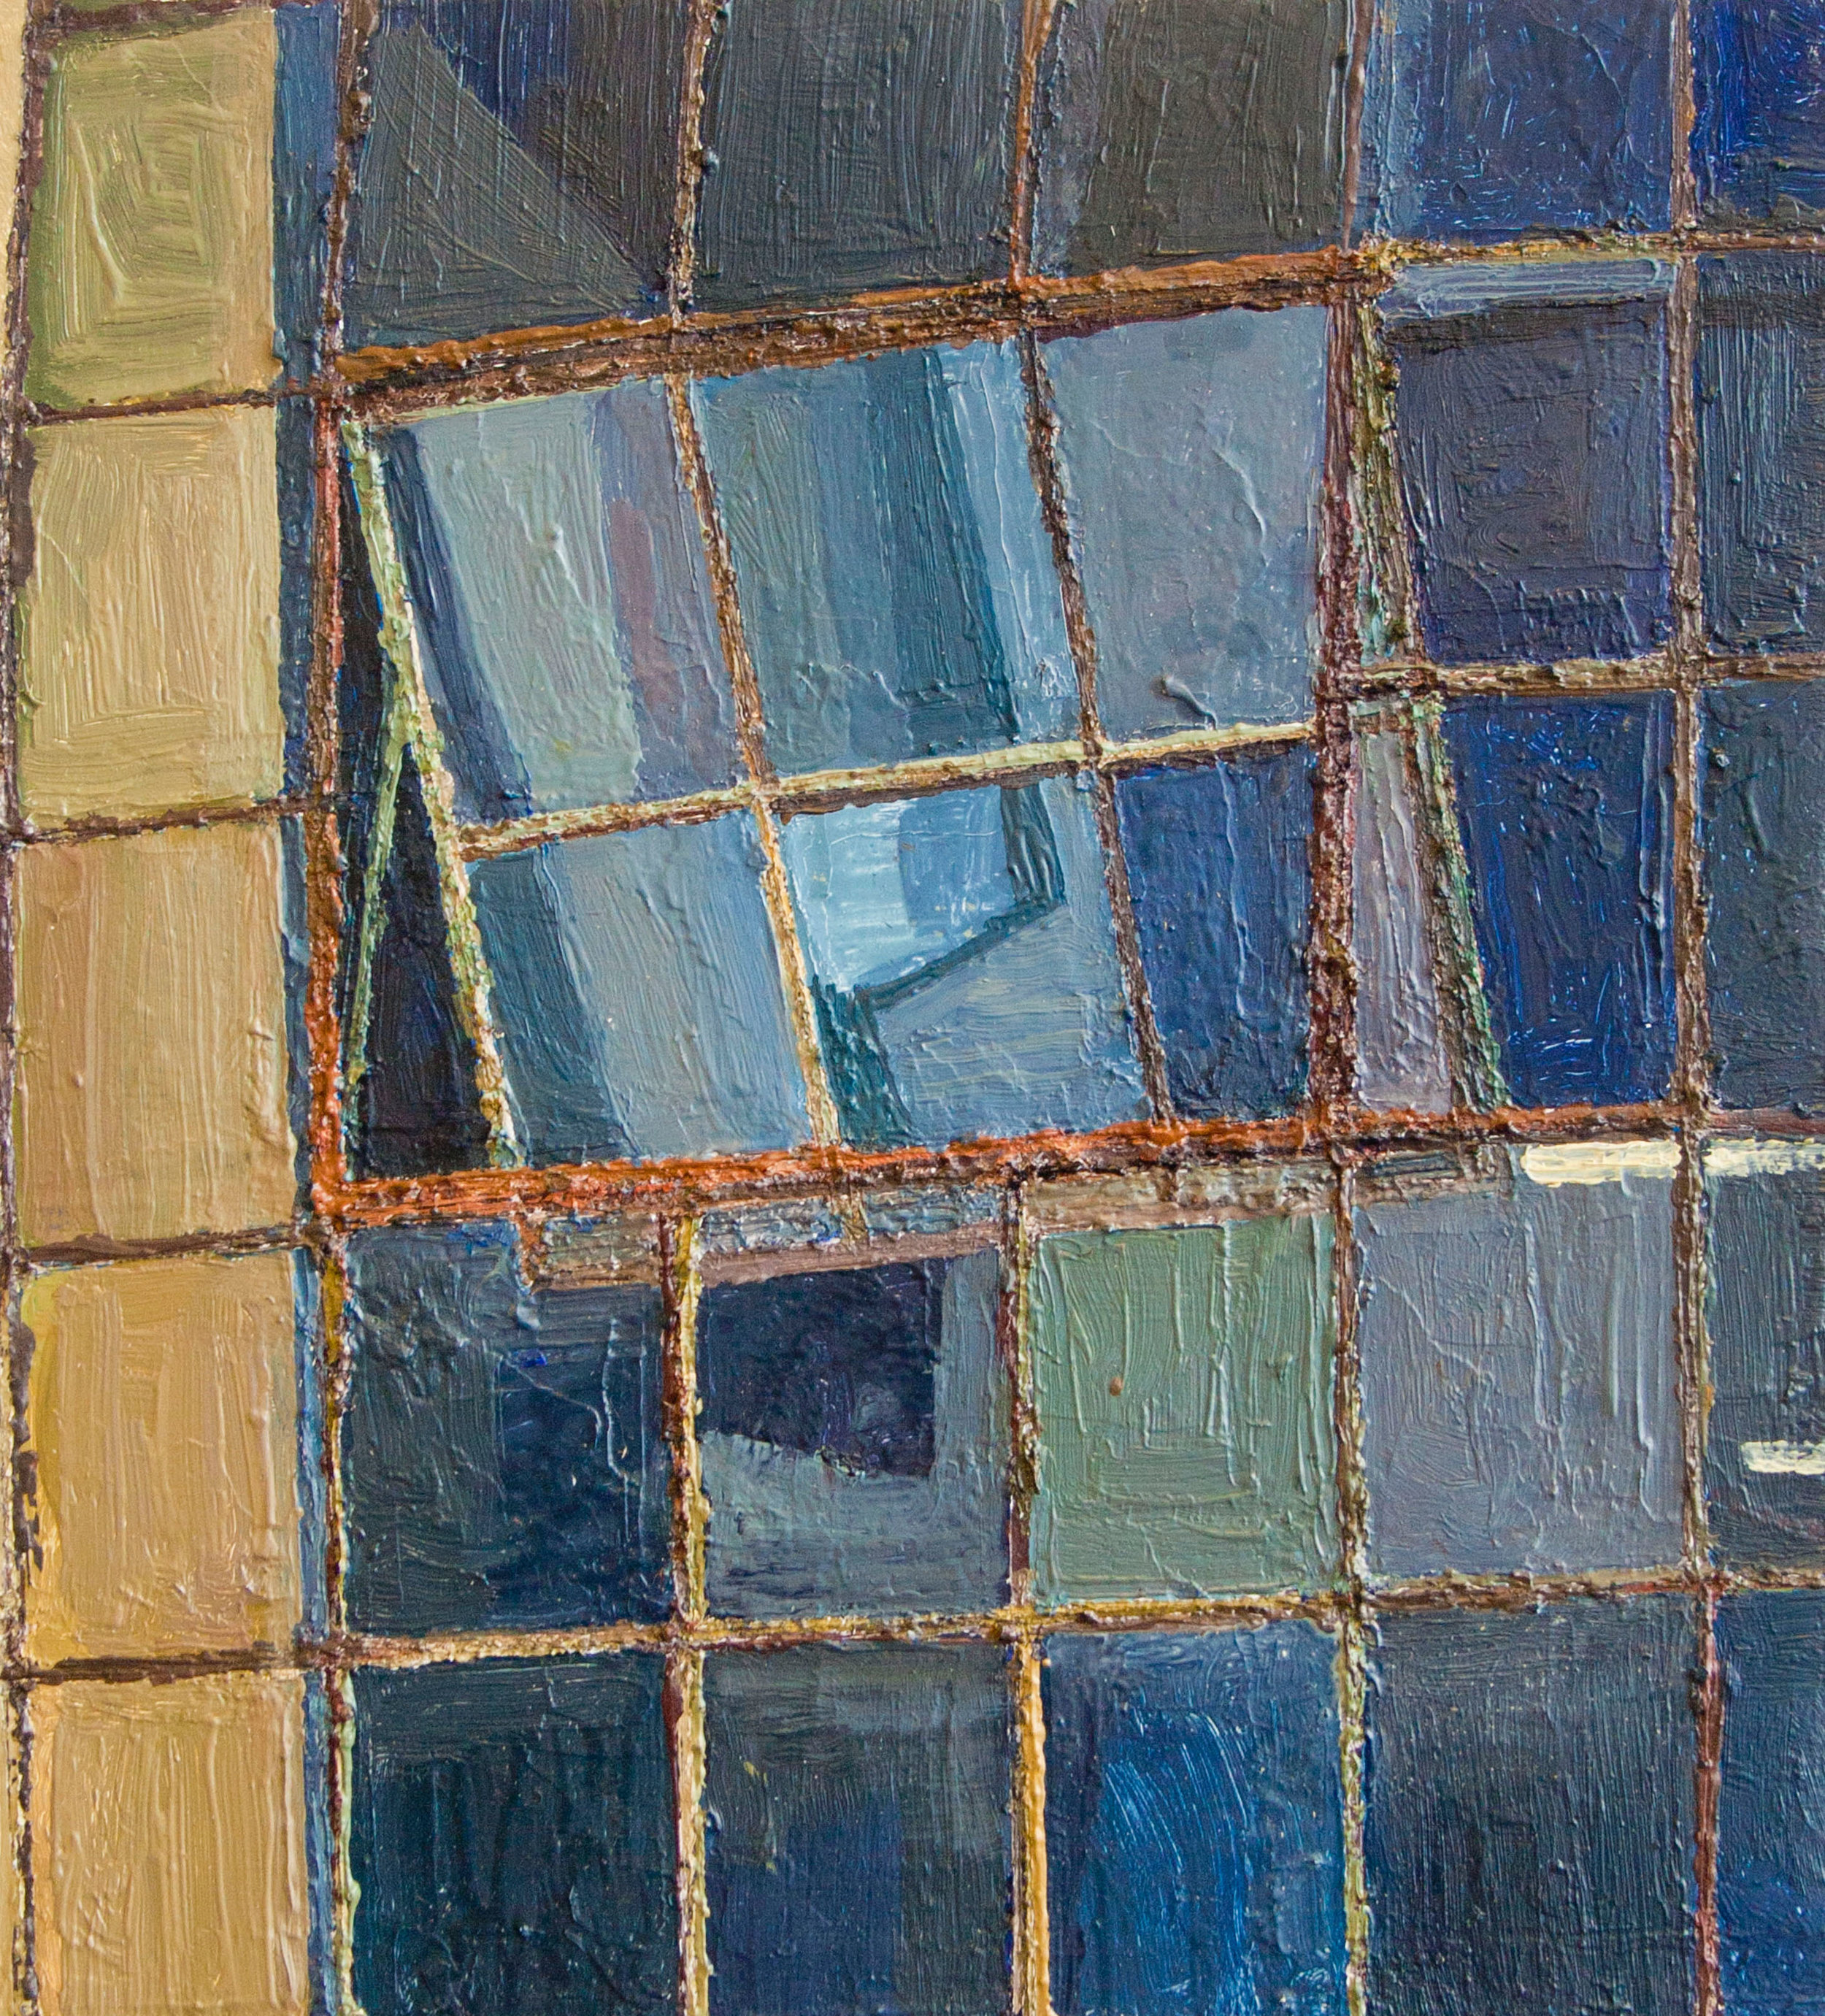 Open night window, Oil on panel, 10 x 9 inches, 2014